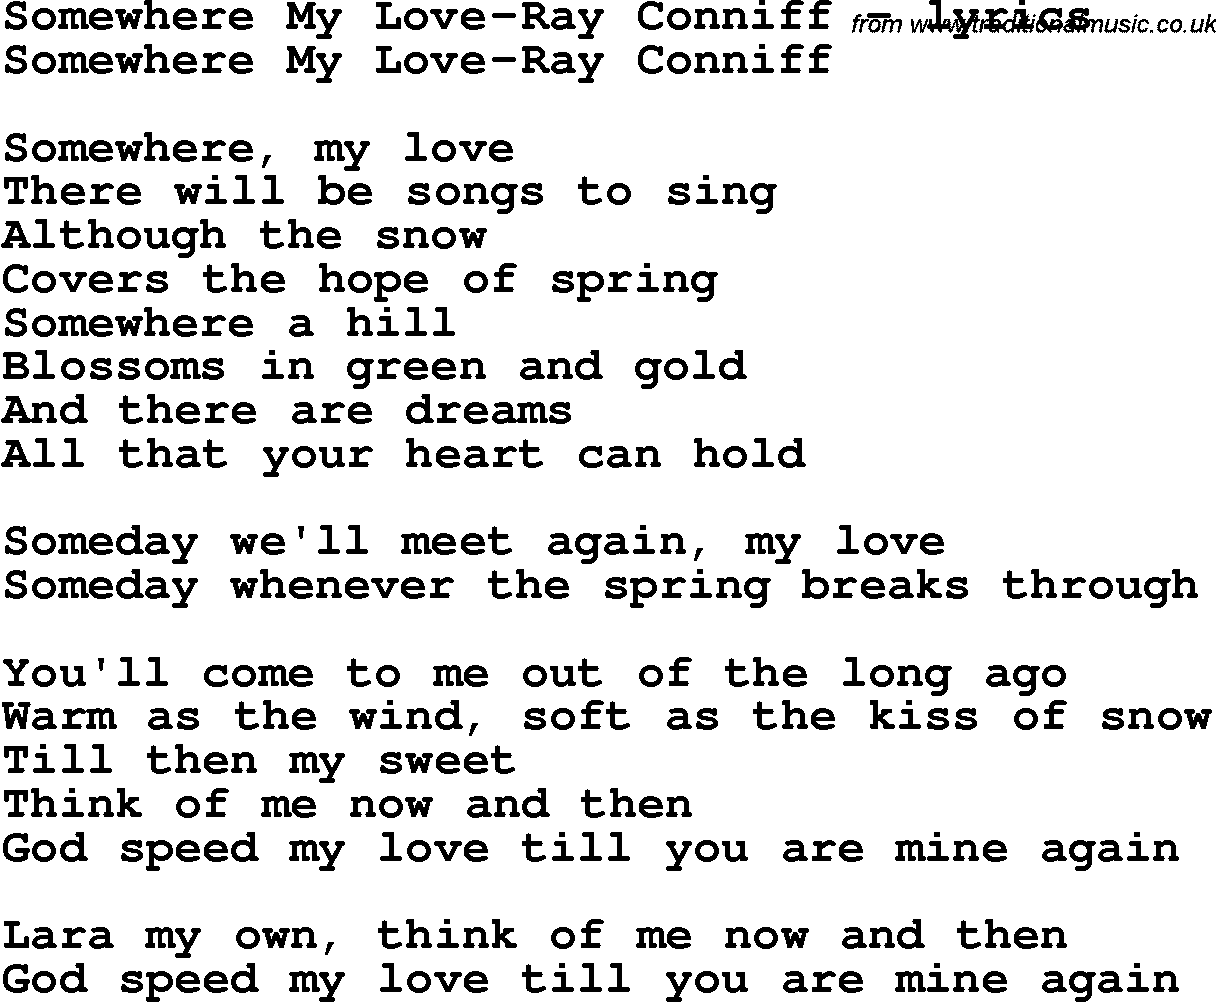 Love Song Lyrics for: Somewhere My Love-Ray Conniff